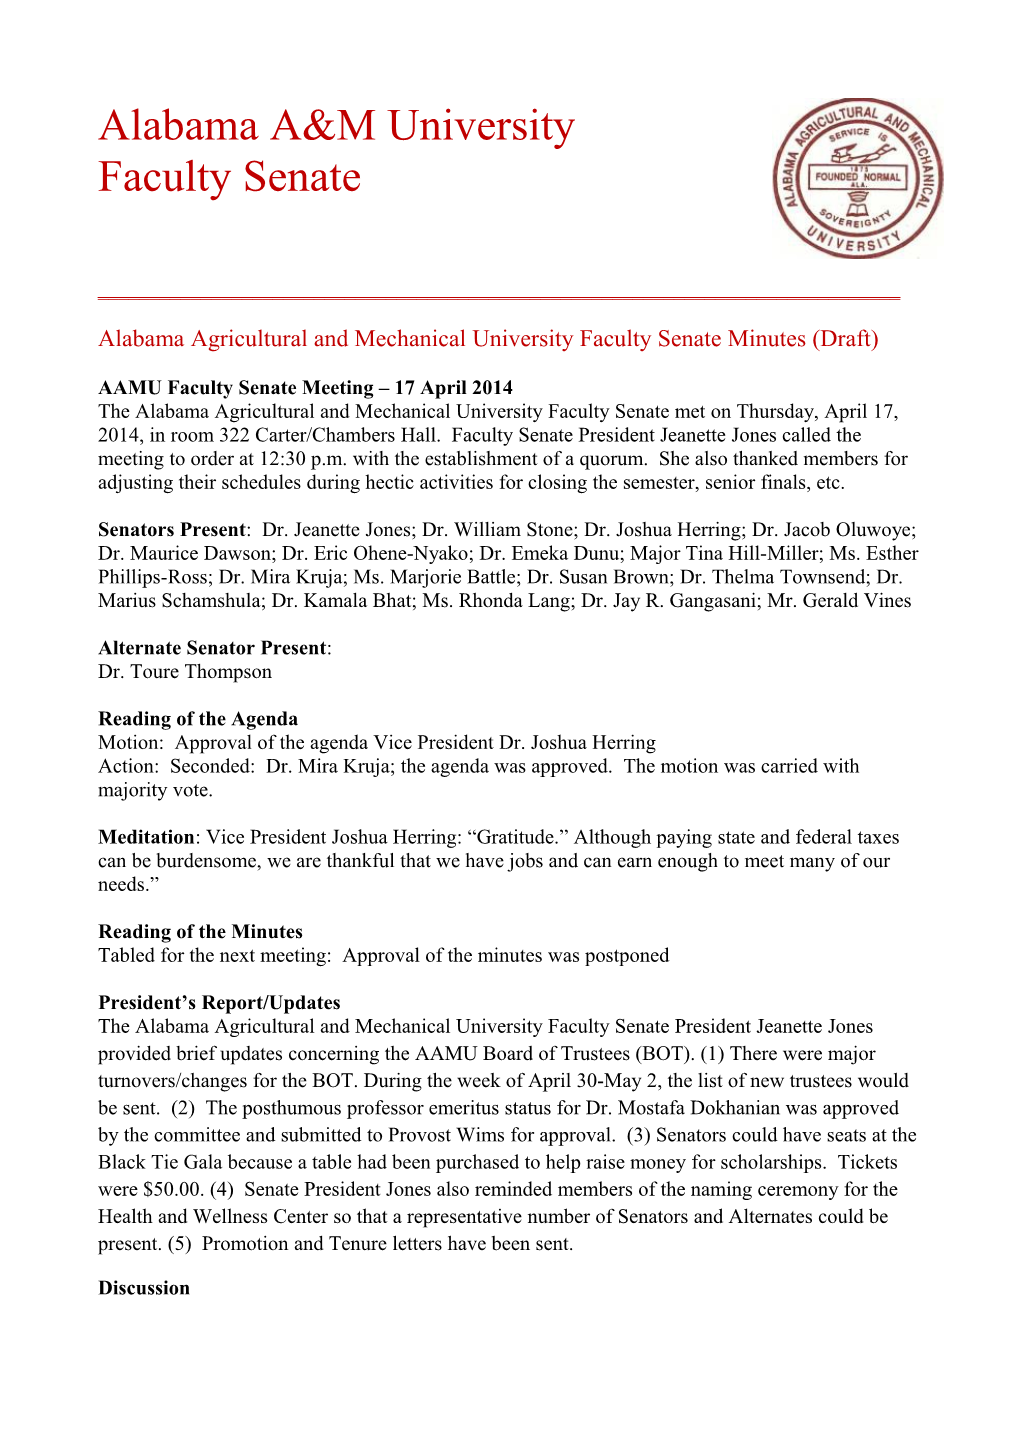 Alabama Agricultural and Mechanical University Faculty Senate Minutes (Draft)